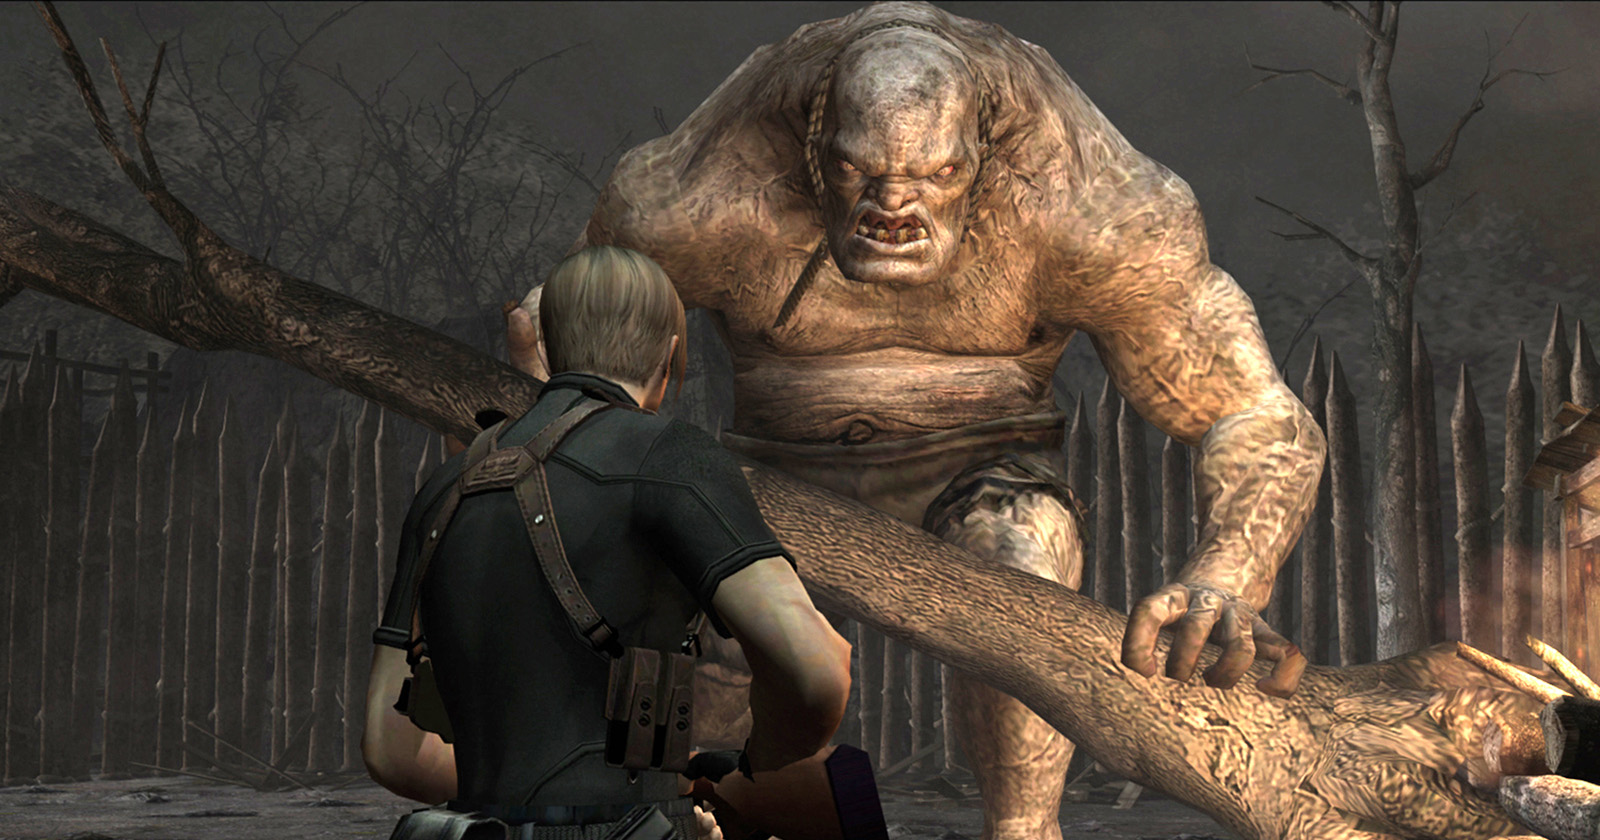 Resident Evil to be remastered in HD - Tech Digest